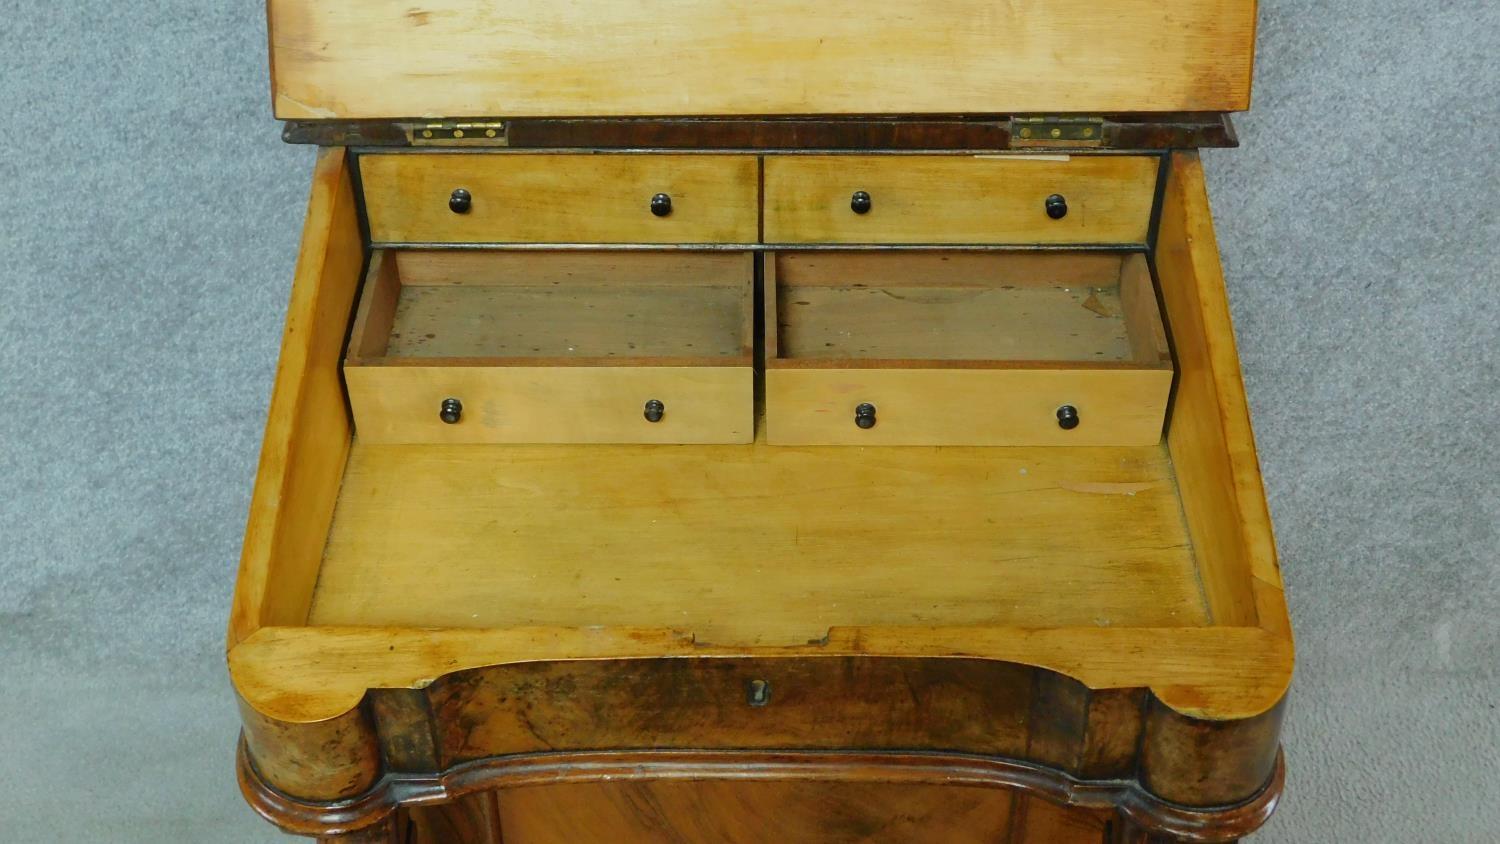 A Victorian burr walnut Davenport with fitted satinwood lined interior and four drawers opposing - Image 3 of 10